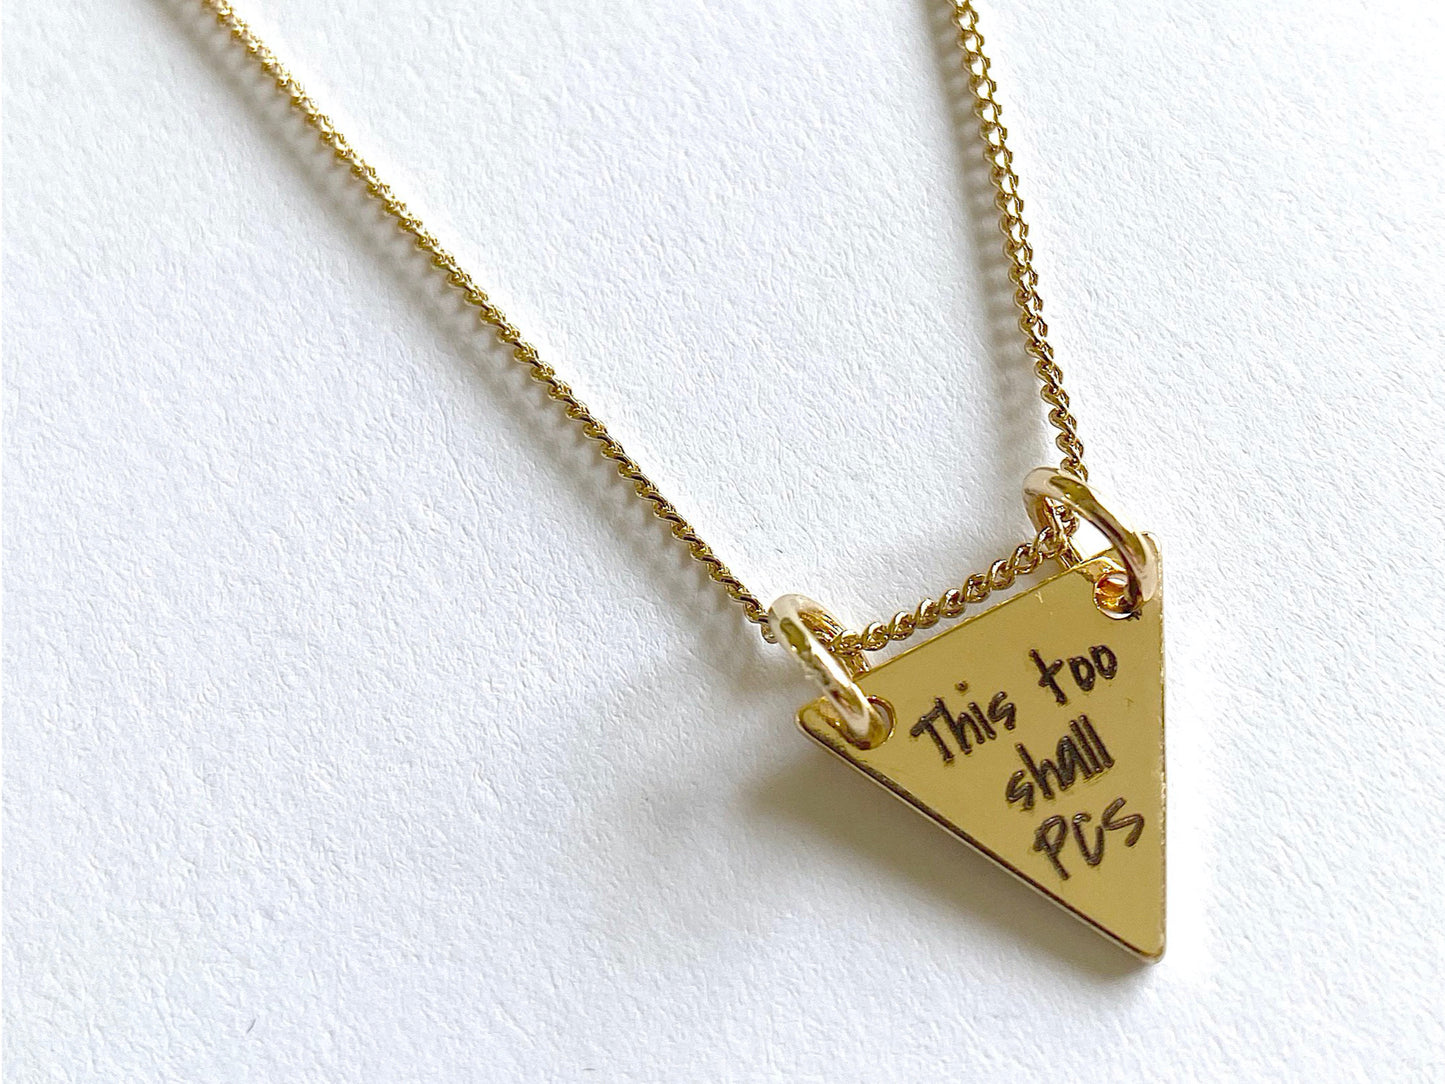 This Too Shall PCS Gold Necklace